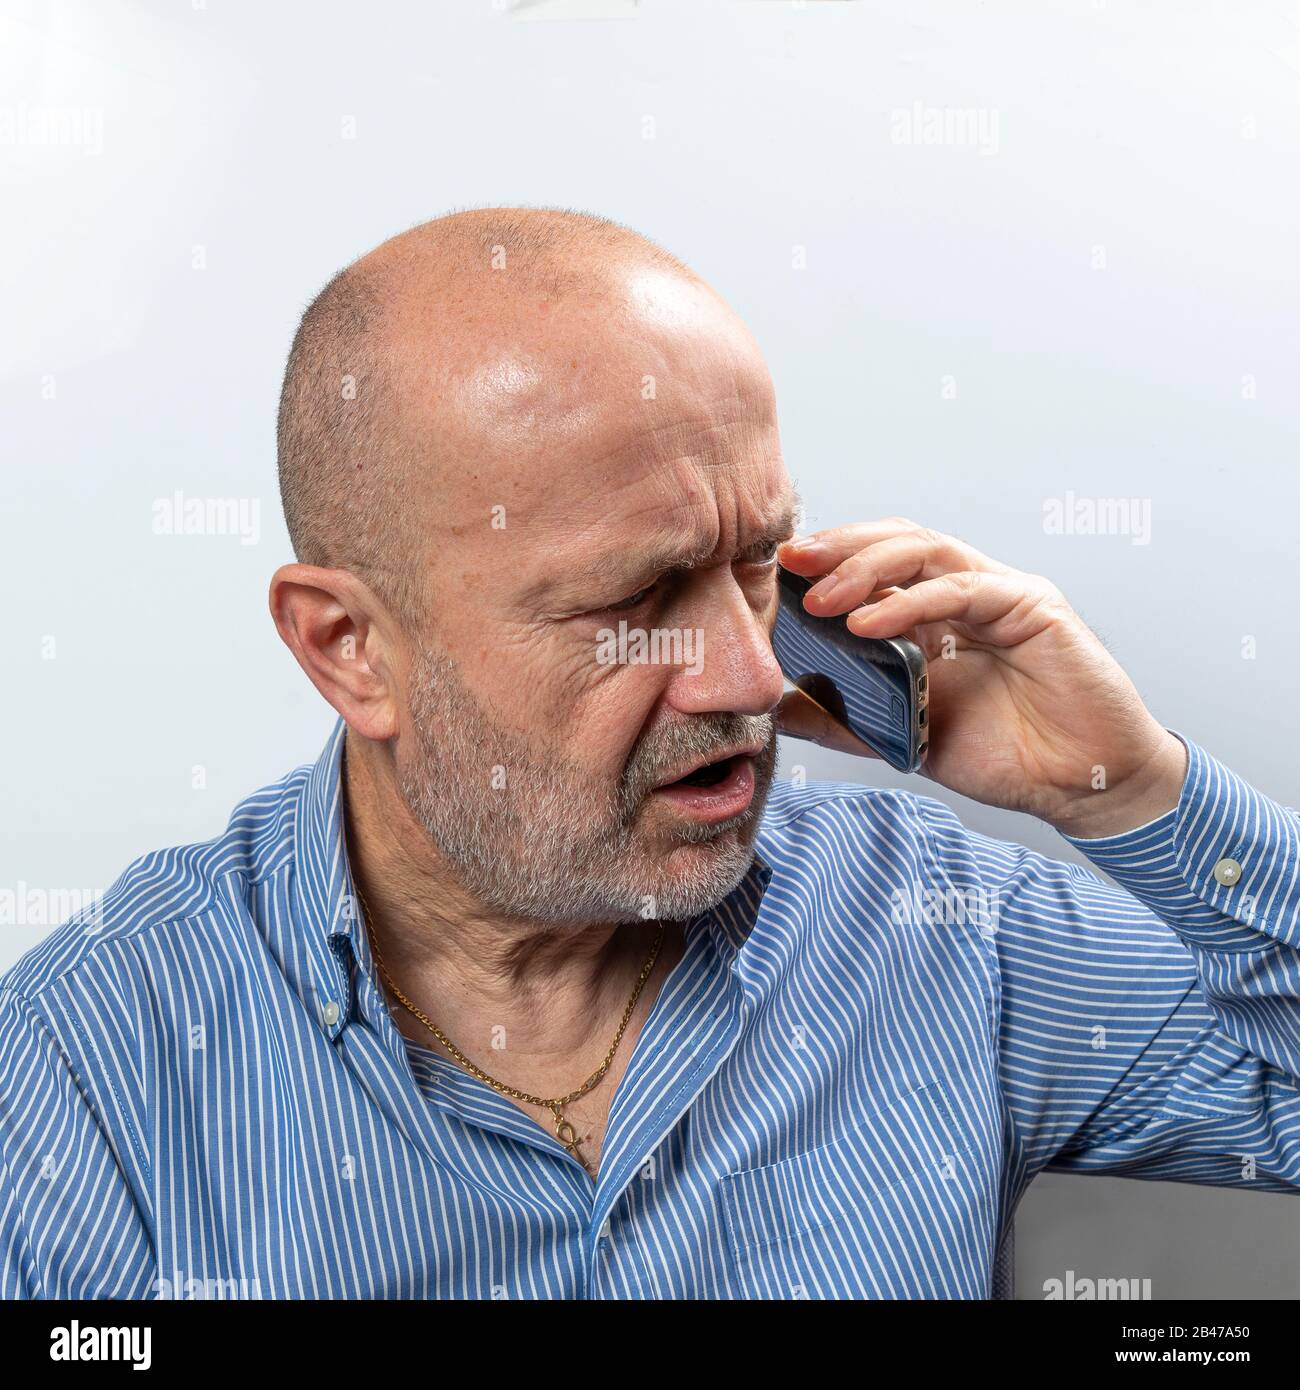 A middle-aged man argues during a cell phone conversation Stock Photo